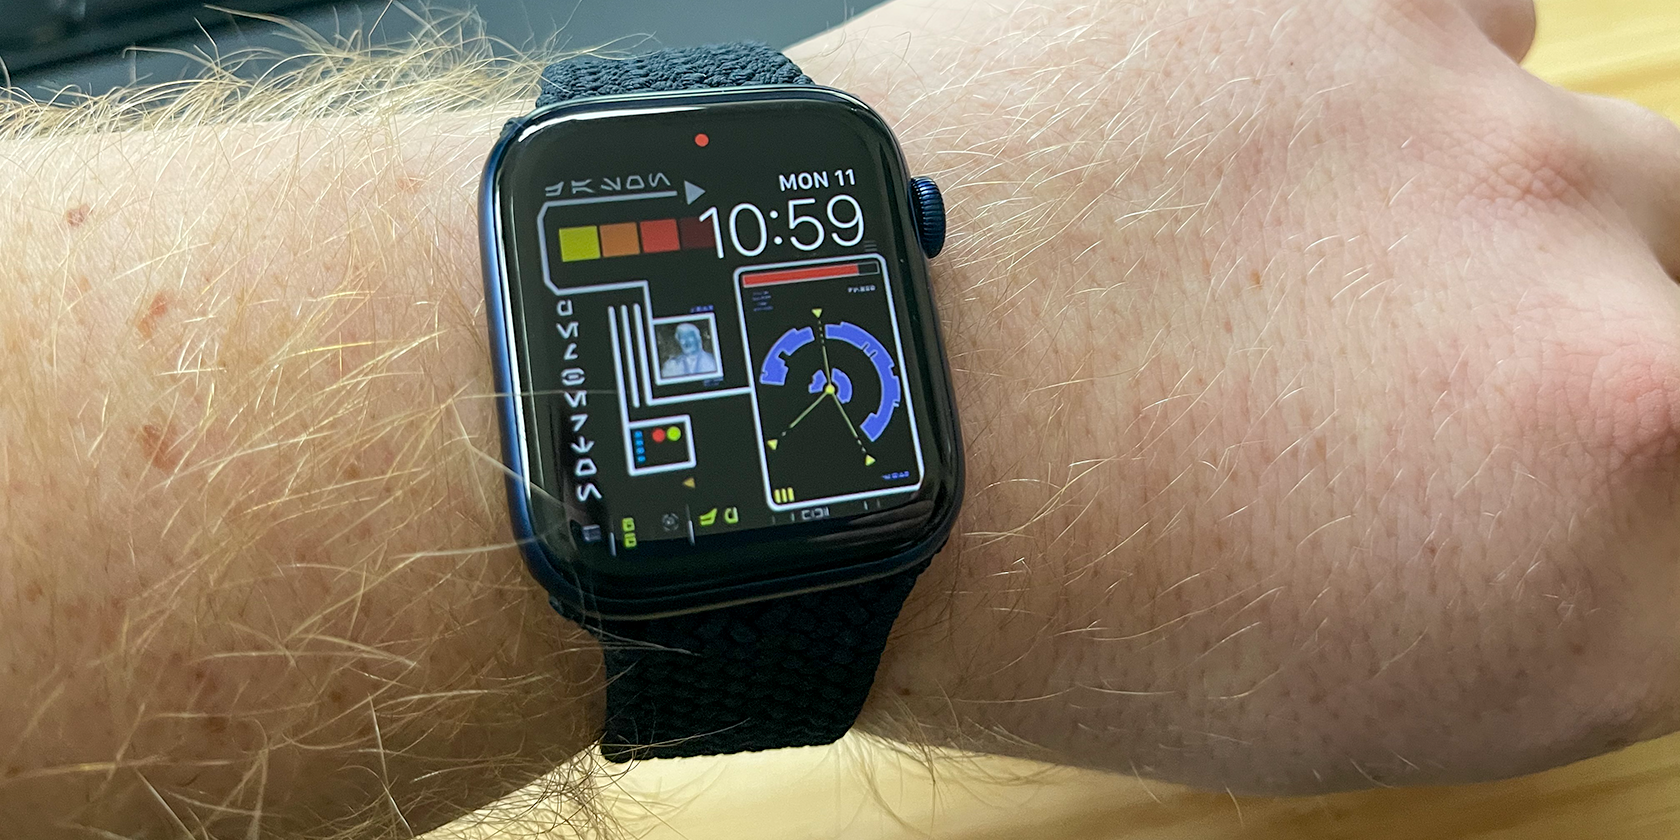 Find and share apple watch faces hero